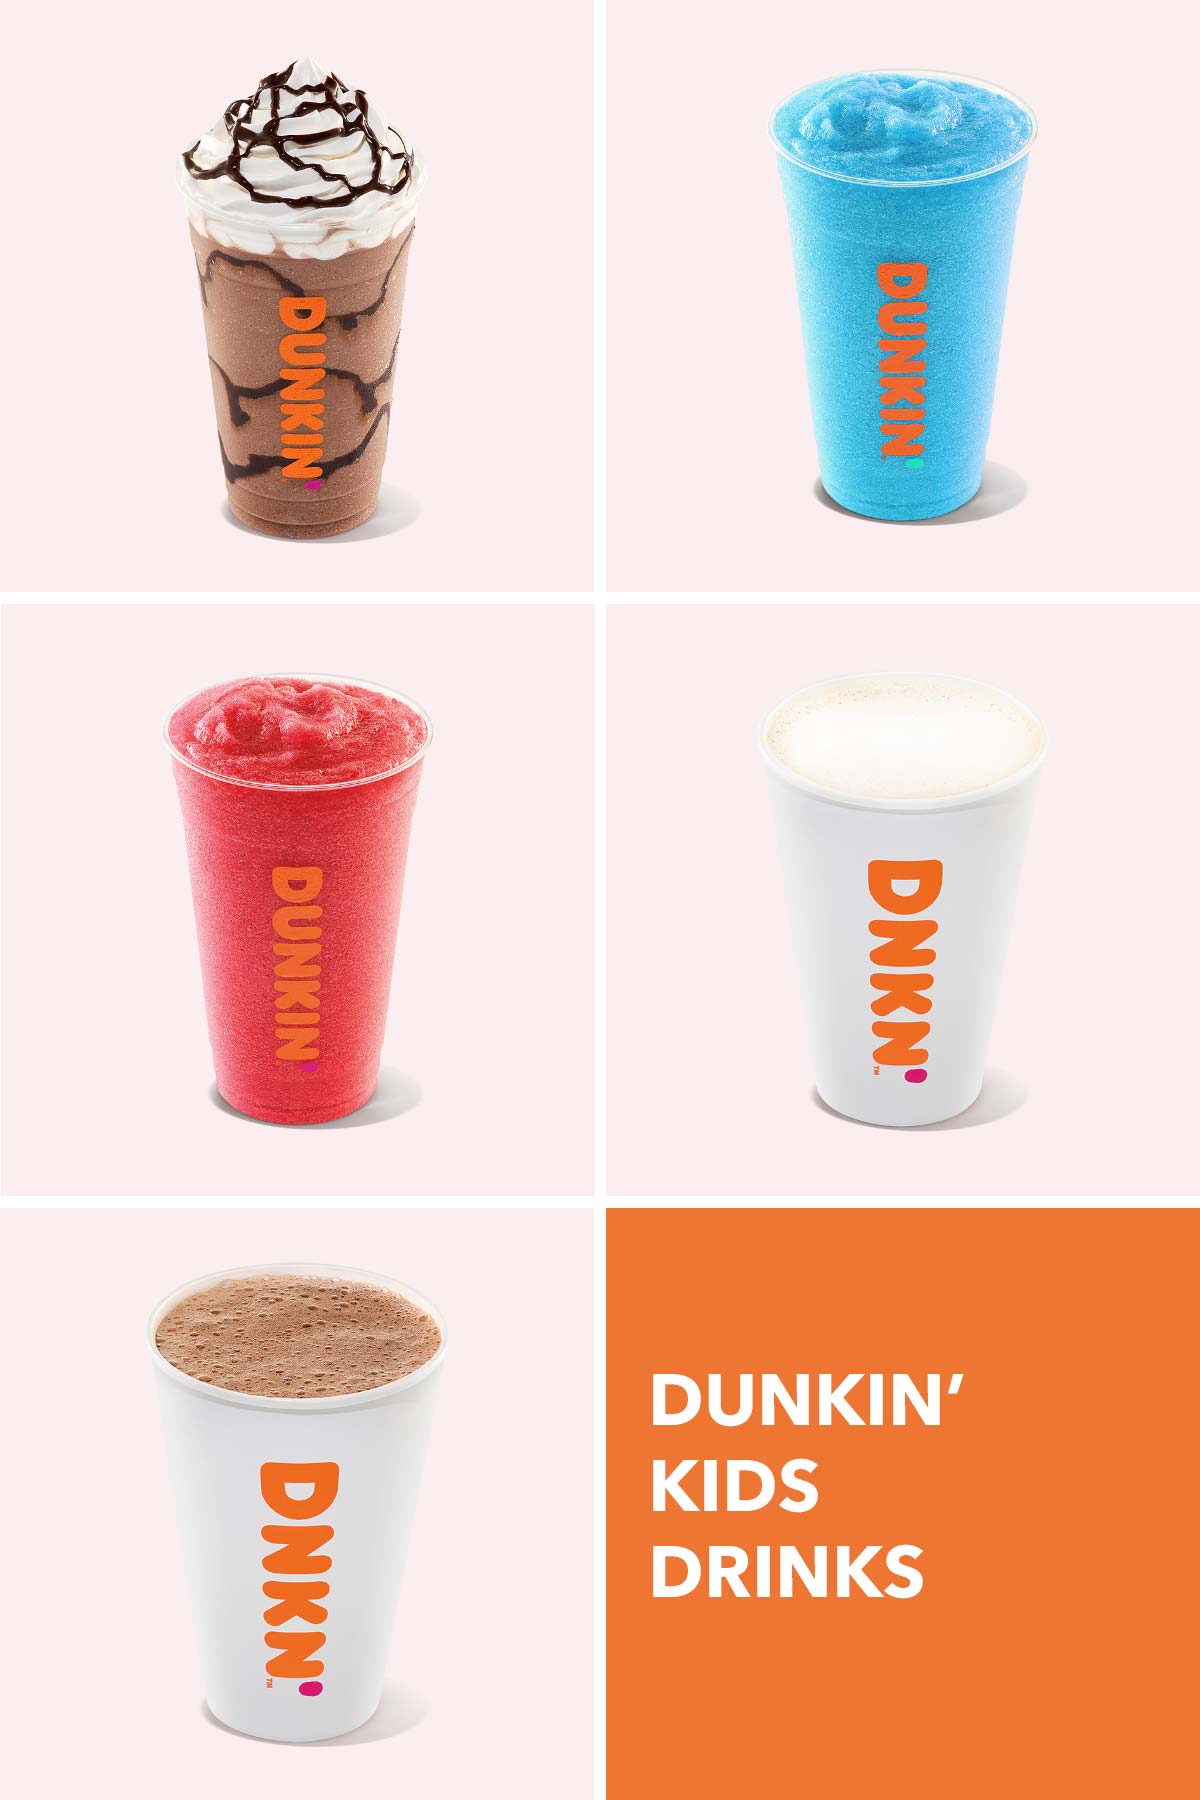 Photo grid showing 5 Dunkin' drinks for kids.